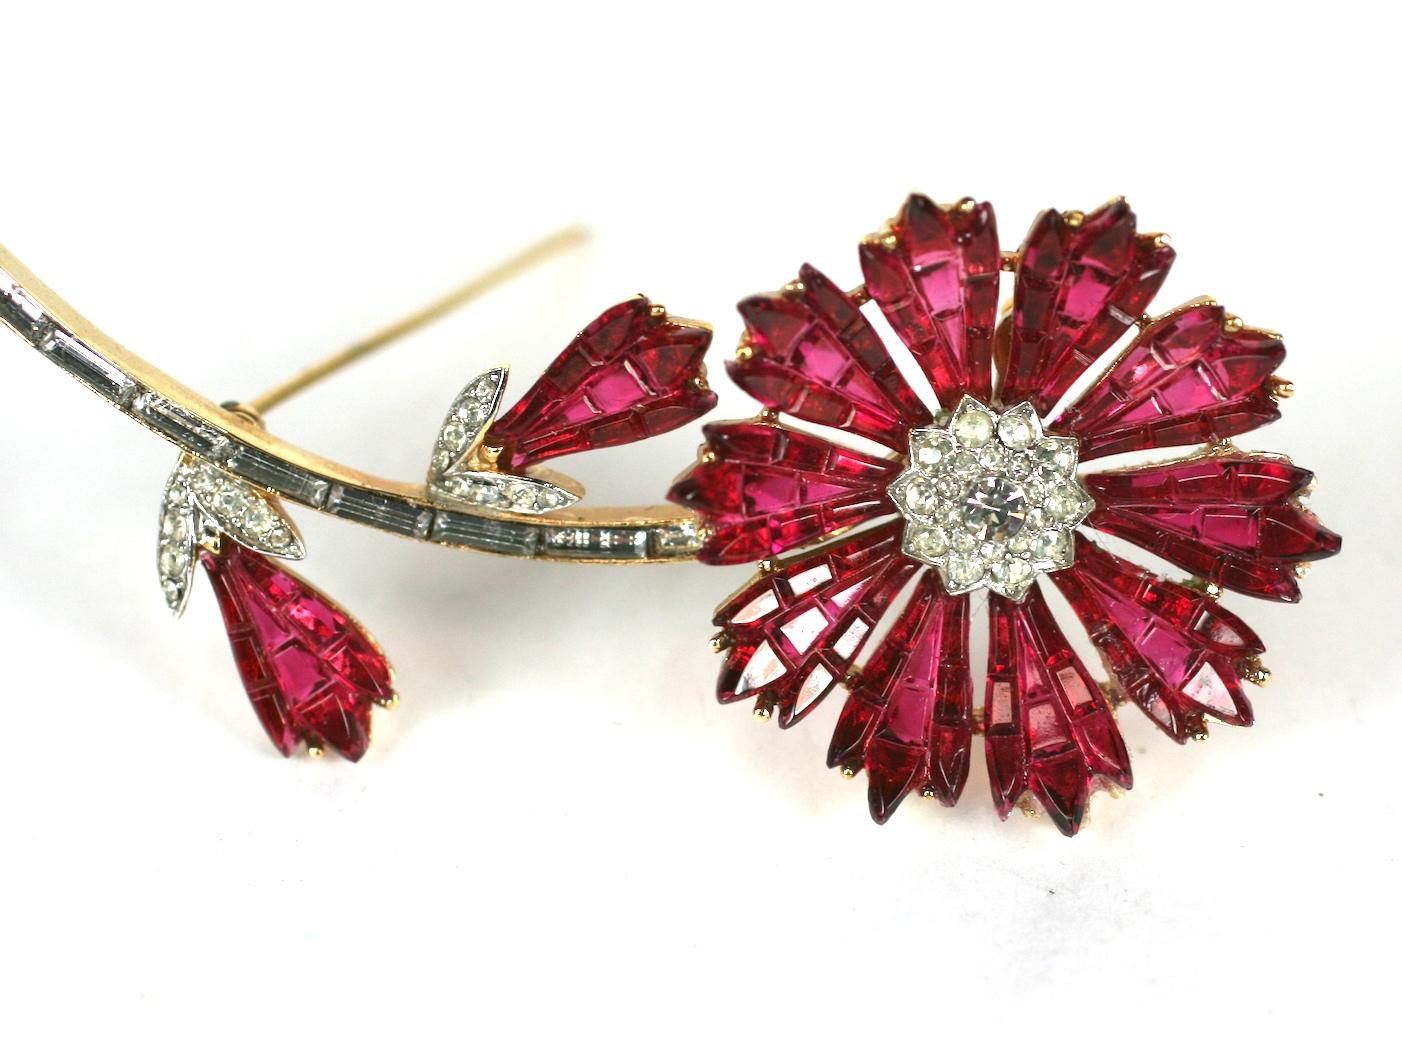 Trifari, Alfred Phillipe Invisibly Set Ruby Flower with ruby waffle glass made to resemble the gem stone settings of Van Cleef and Arpels. Pave cluster center with baguette decorated stem.
Highly collectible Trifari series, 1960's USA. 
Excellent